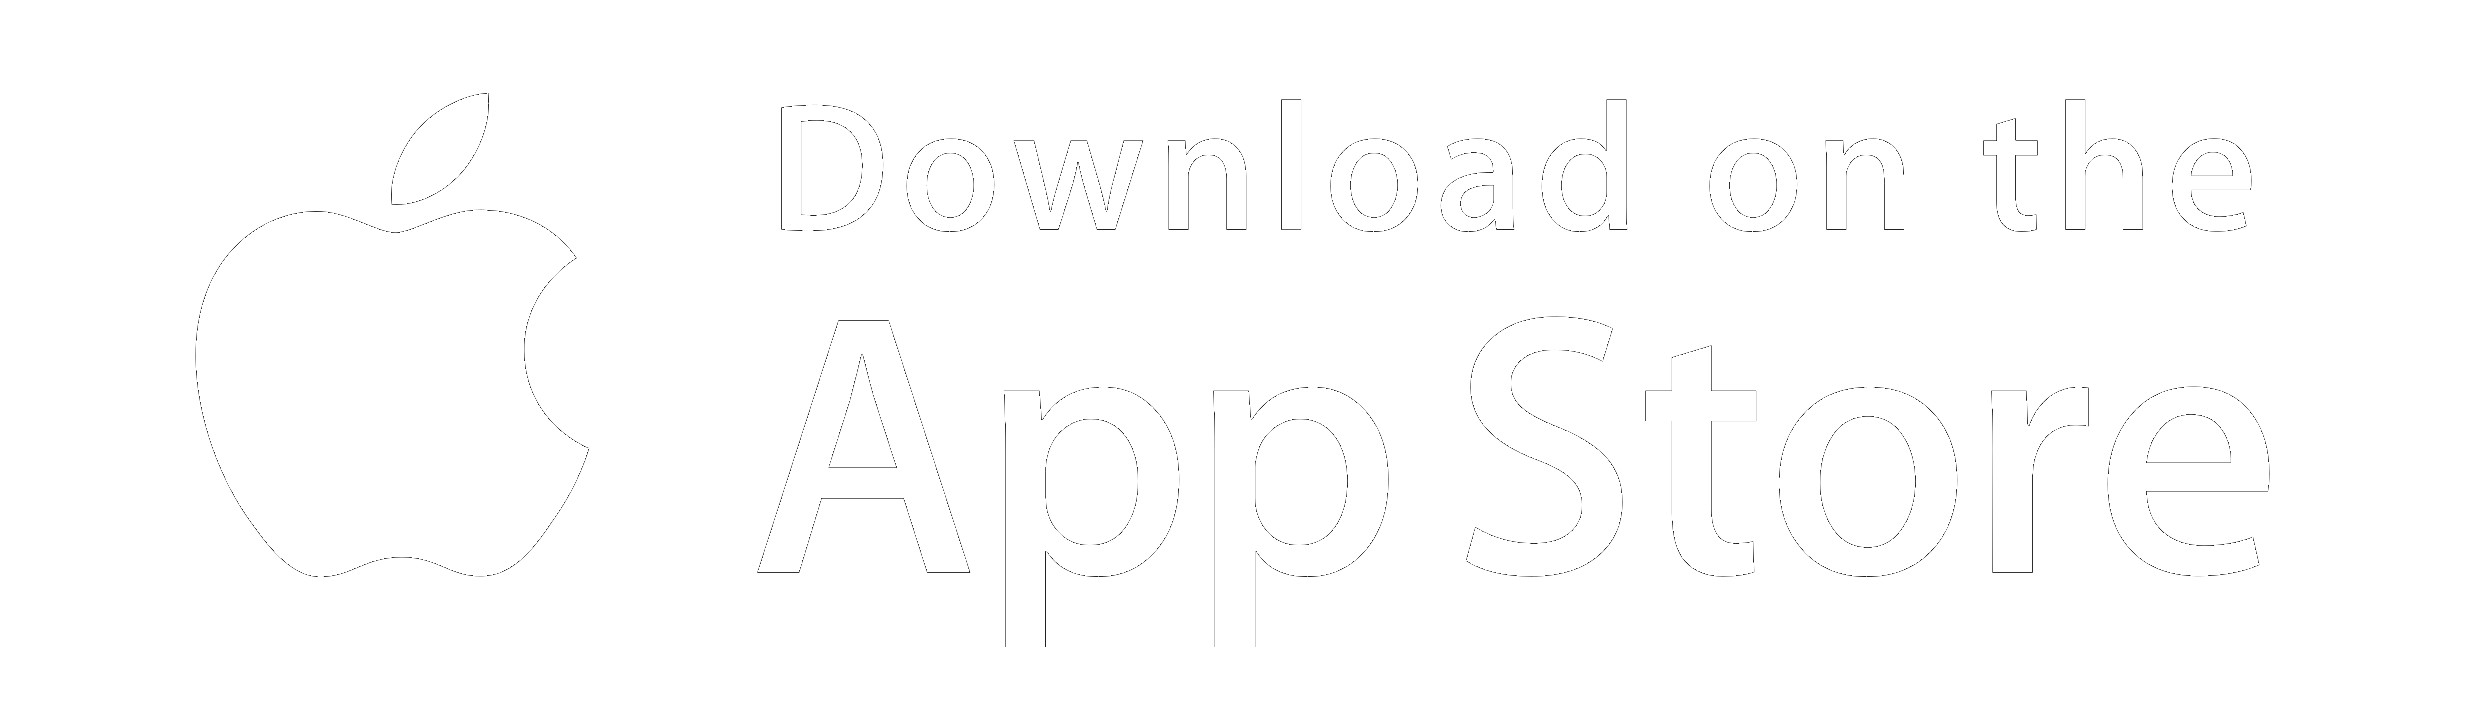 Download app store white